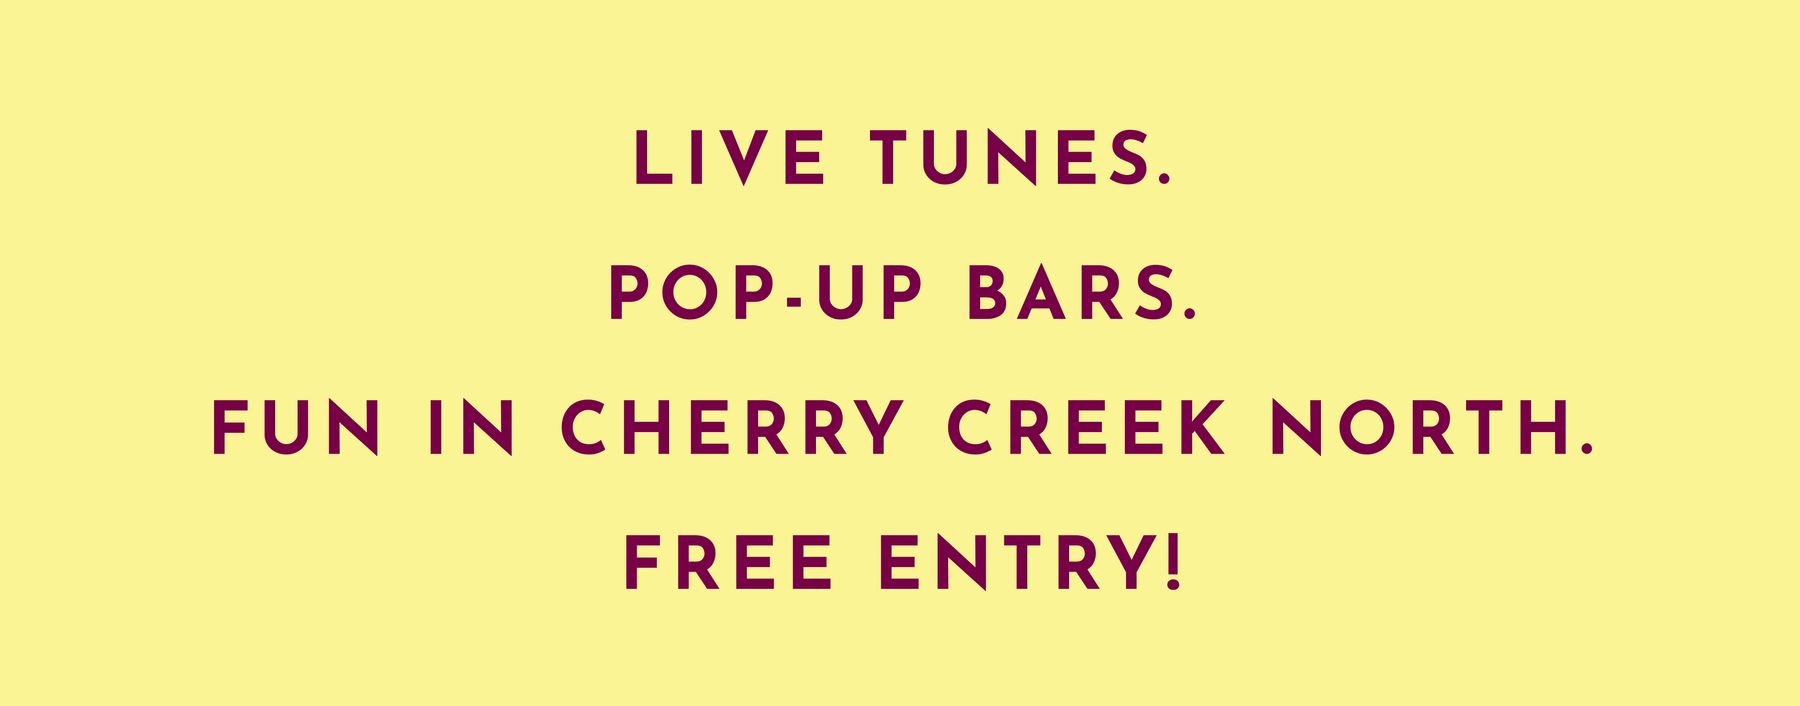 Live tunes. Pop-up bars. Fun in Cherry Creek North. Free entry!